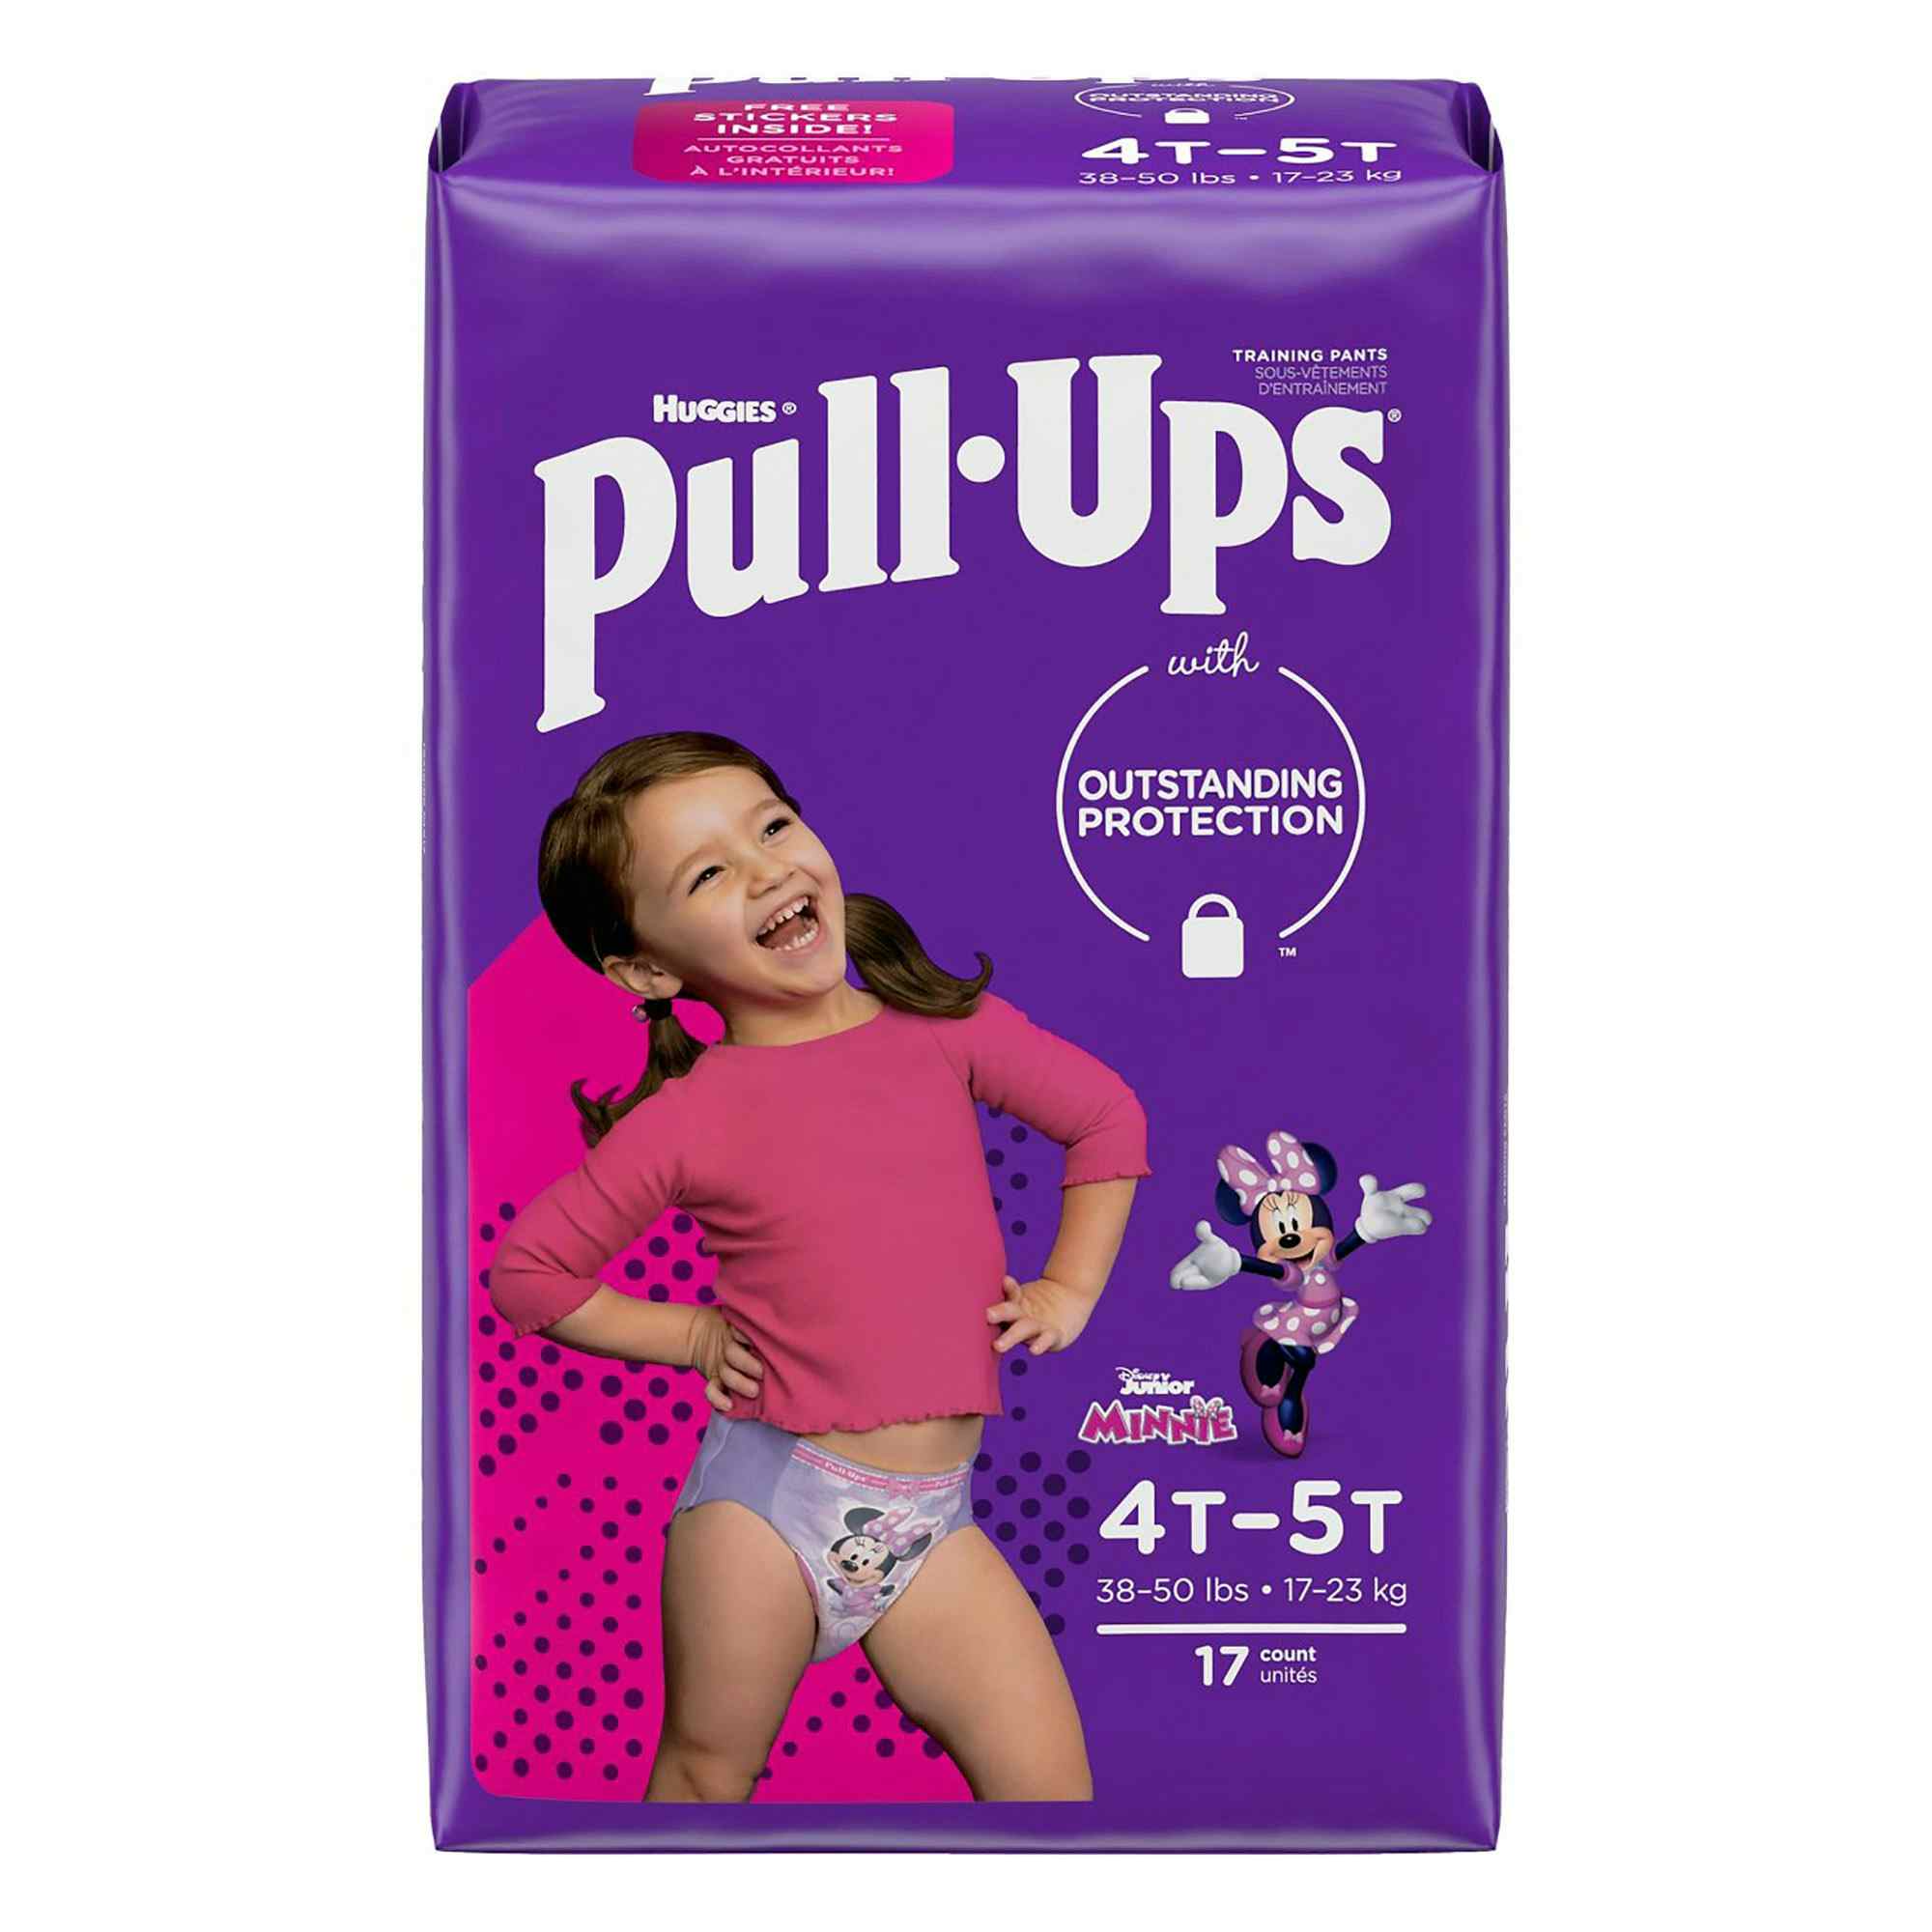 Huggies Girls Pull-Ups with Outstanding Protection, Moderate Absorbency, 51357, 4T-5T (38-50 lbs) - Case of 68 (4 Packs)